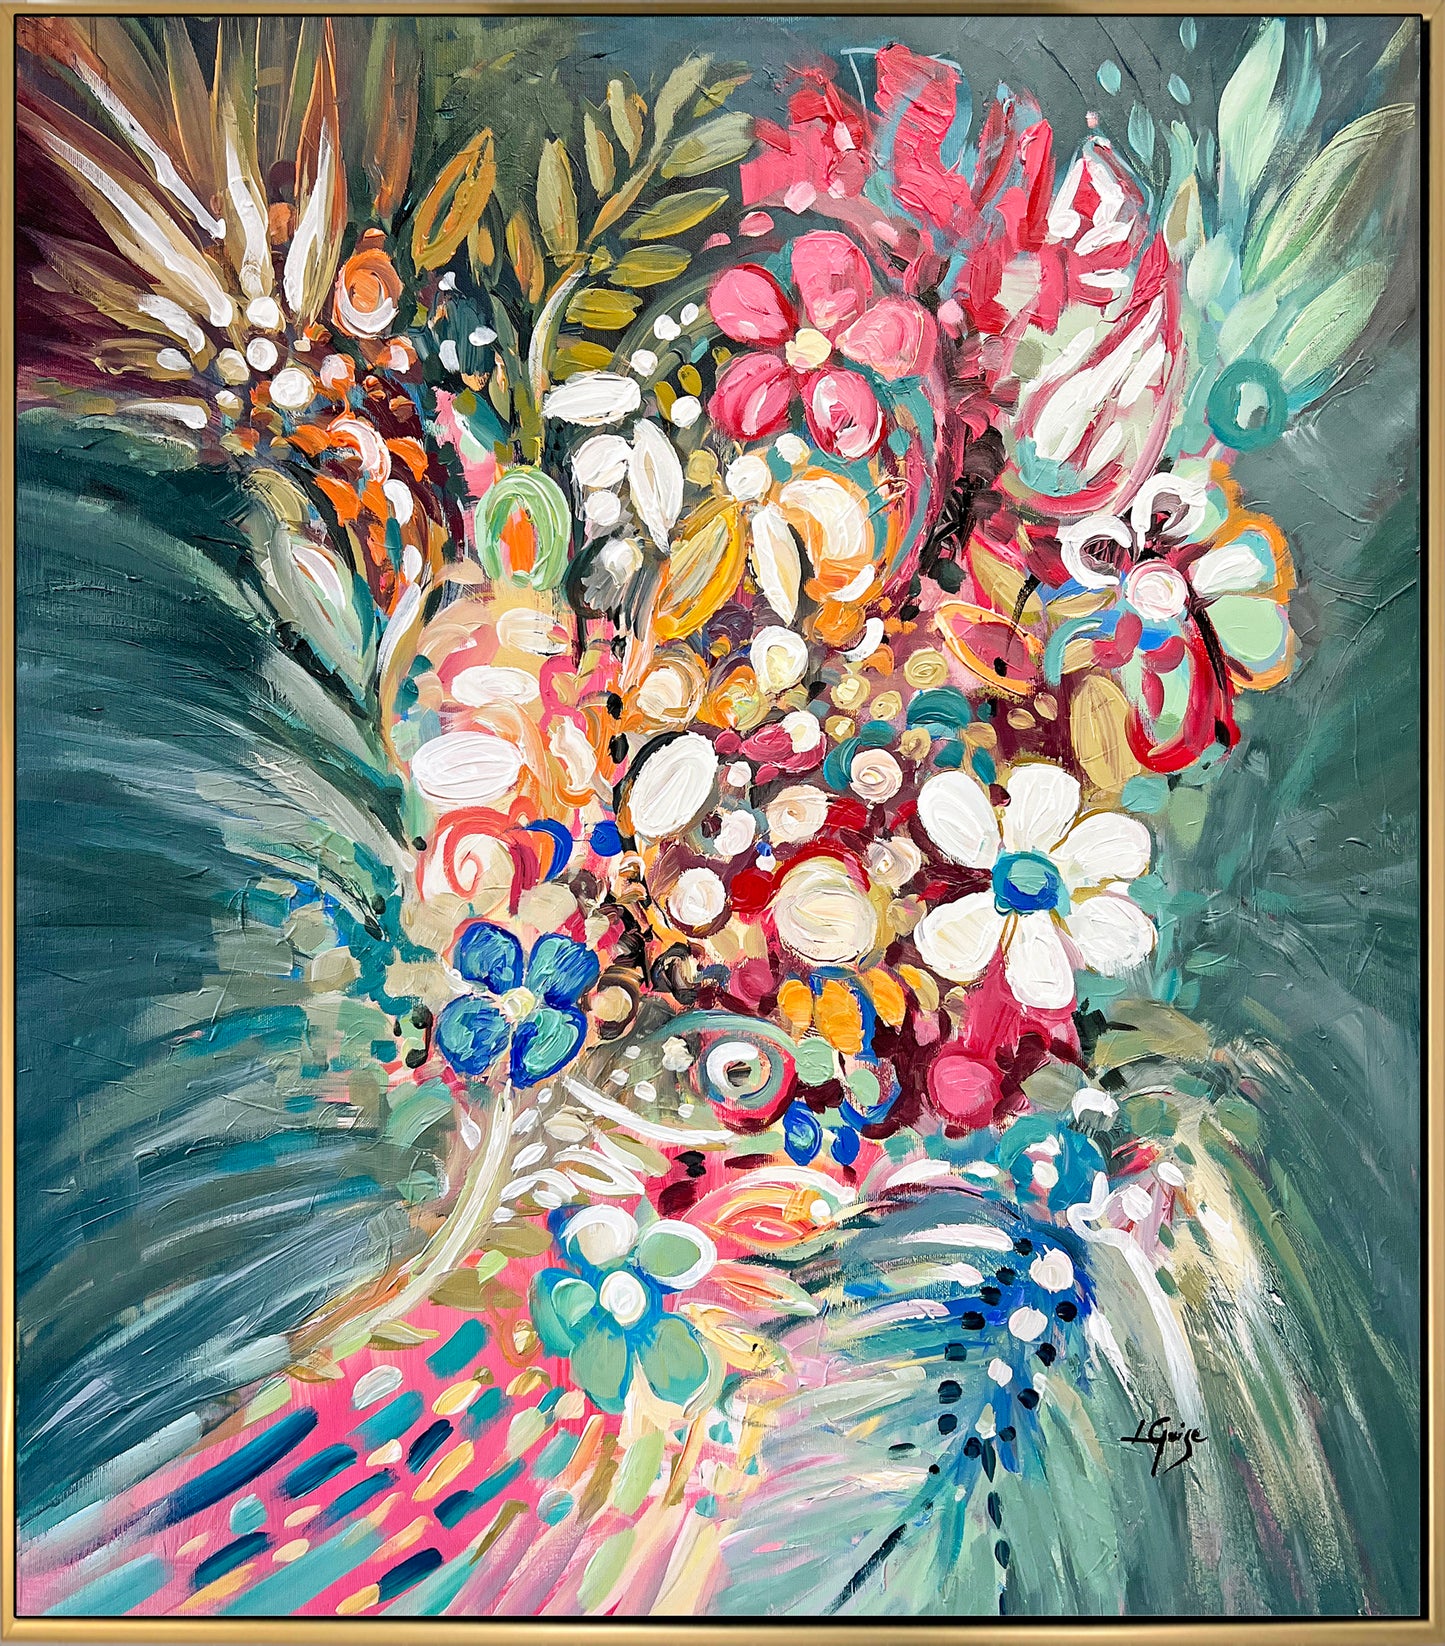 a painting of colorful flowers in a vase